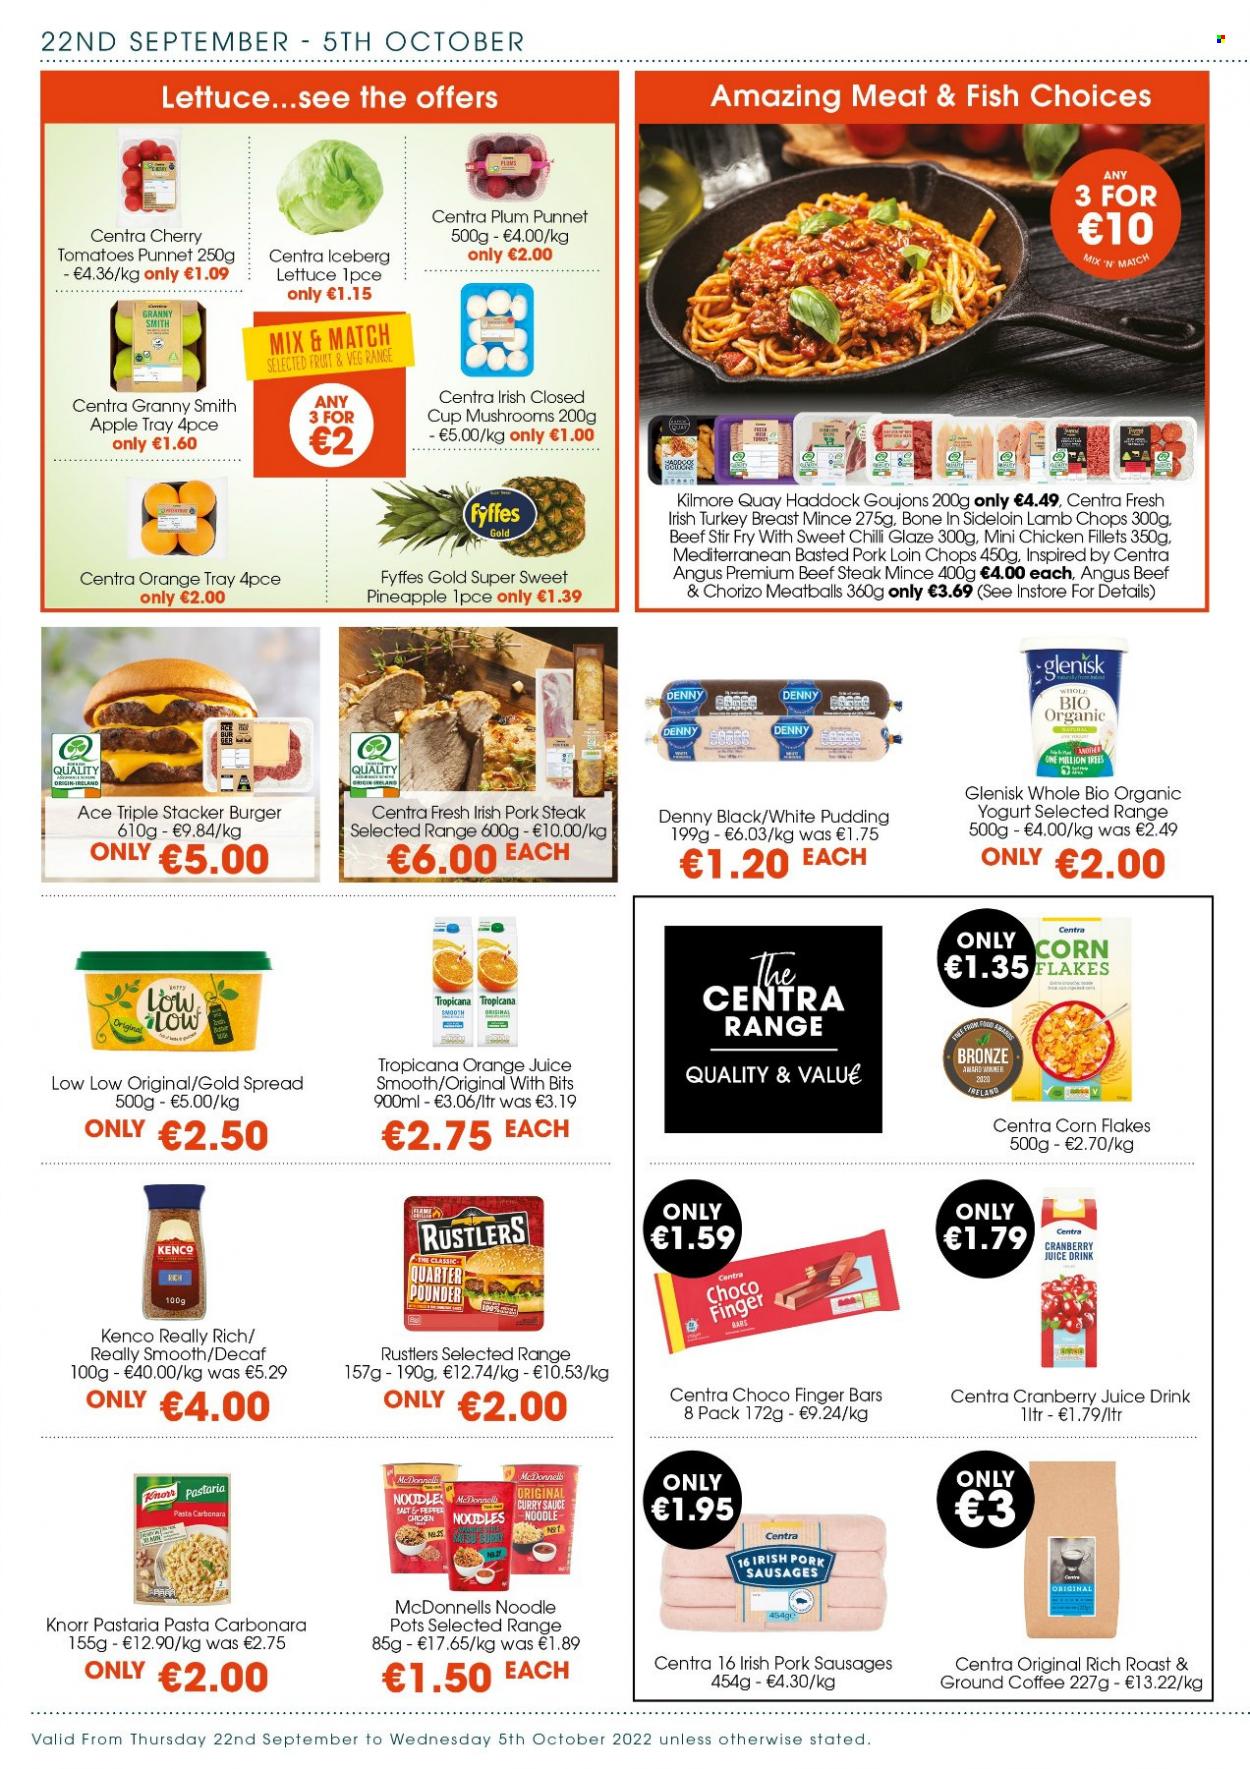 thumbnail - Centra offer  - 22.09.2022 - 05.10.2022 - Sales products - Ace, tomatoes, lettuce, pineapple, Granny Smith, haddock, fish, meatballs, hamburger, pasta, Knorr, sauce, noodles, sausage, pudding, yoghurt, organic yoghurt, corn flakes, curry sauce, cranberry juice, orange juice, juice, coffee, ground coffee, turkey breast, beef meat, beef steak, steak, pork chops, pork loin, pork meat, lamb chops, lamb meat, tray, pot. Page 2.